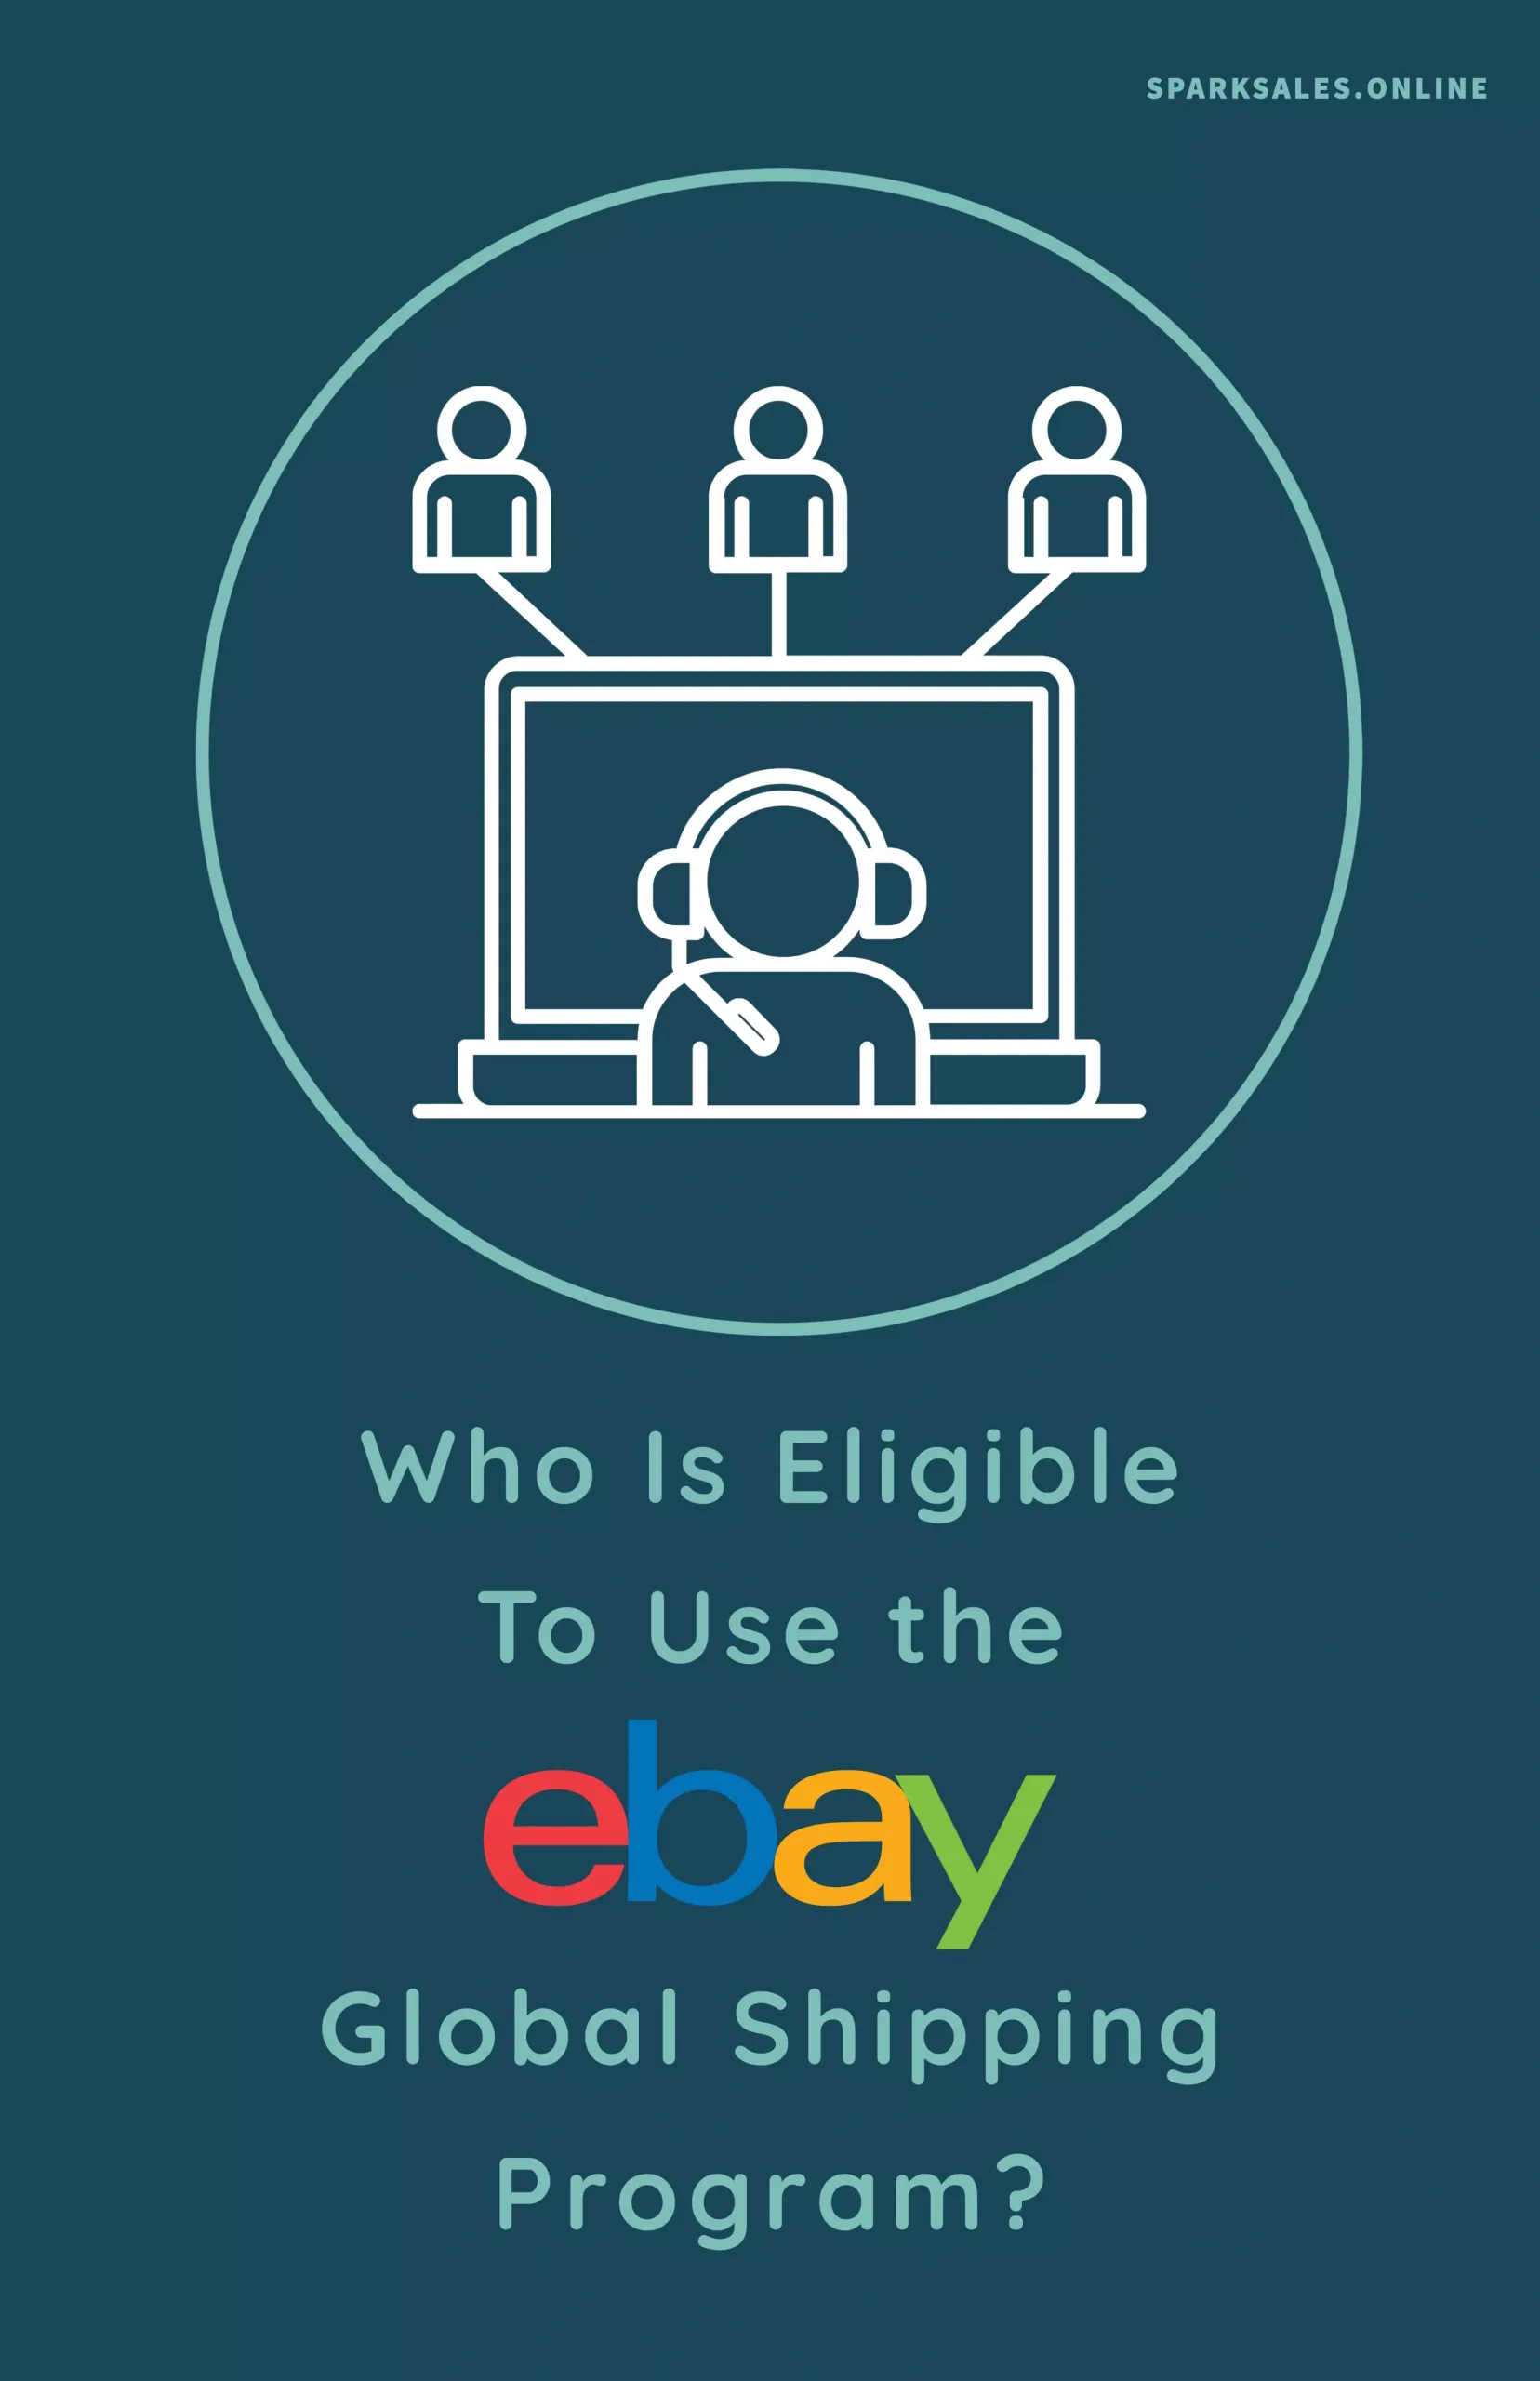 Who Is Eligible To Use the eBay Global Shipping Program?